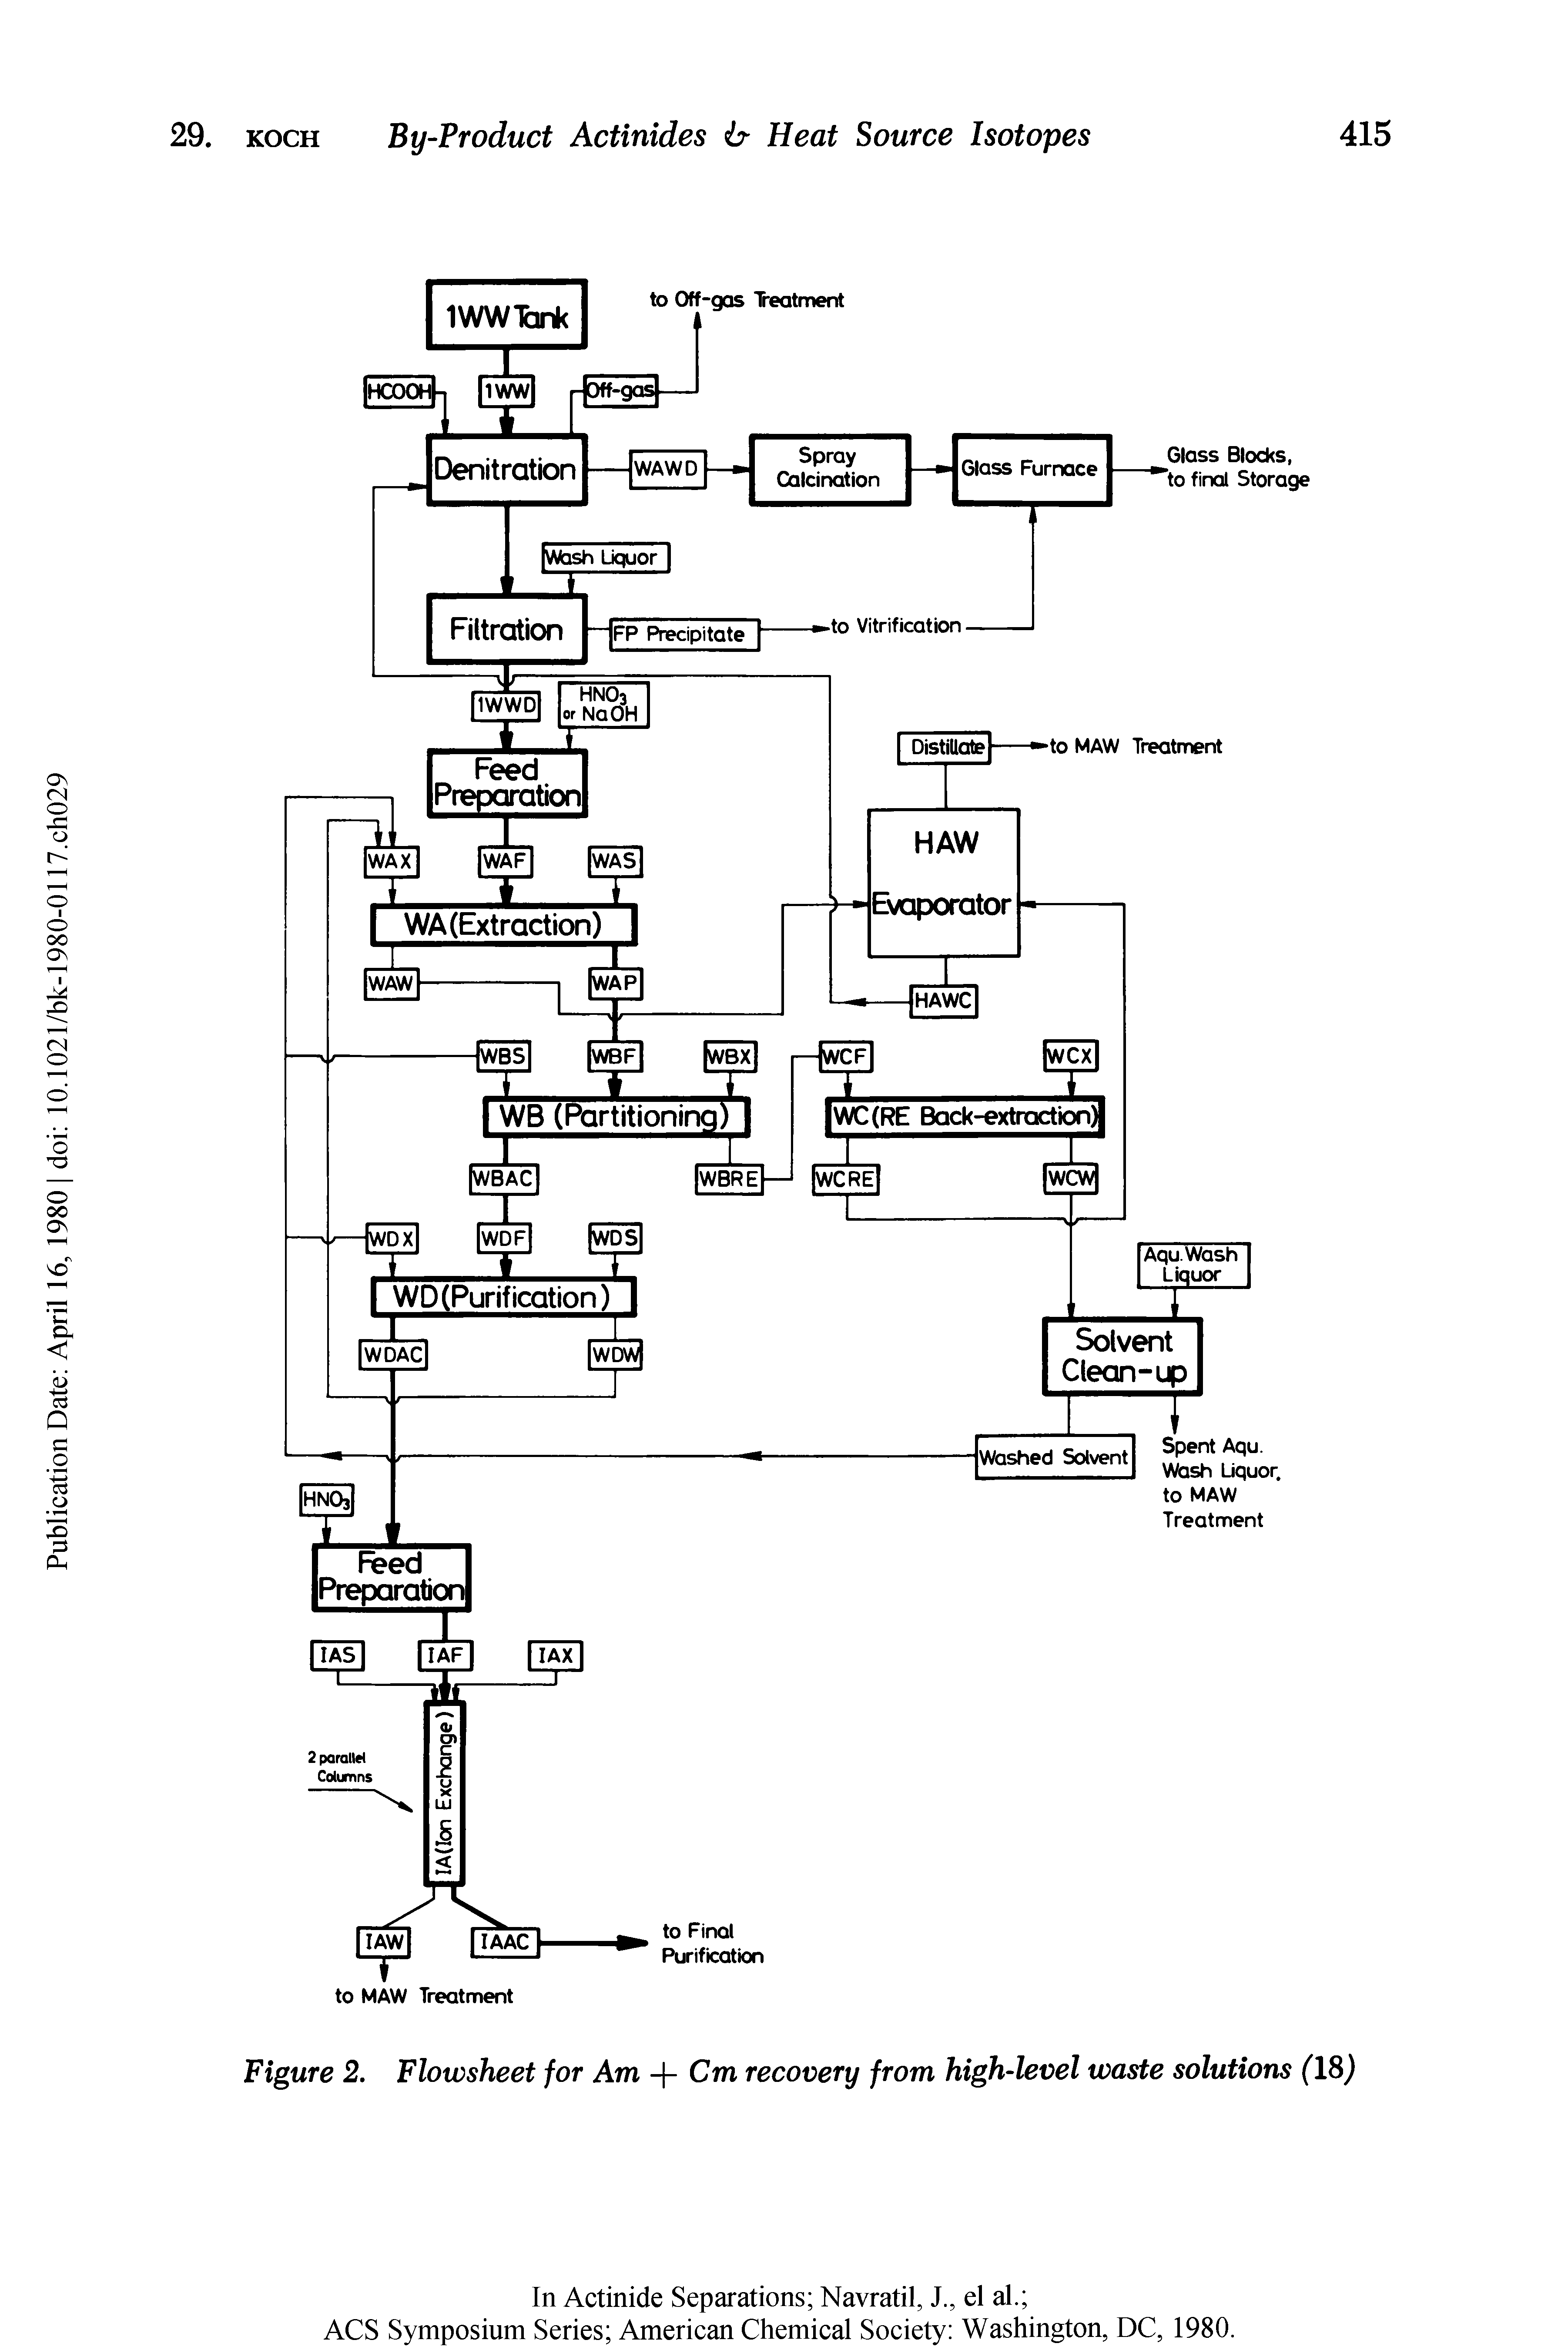 Figure 2. Flowsheet for Am + Cm recovery from high-level waste solutions (18)...